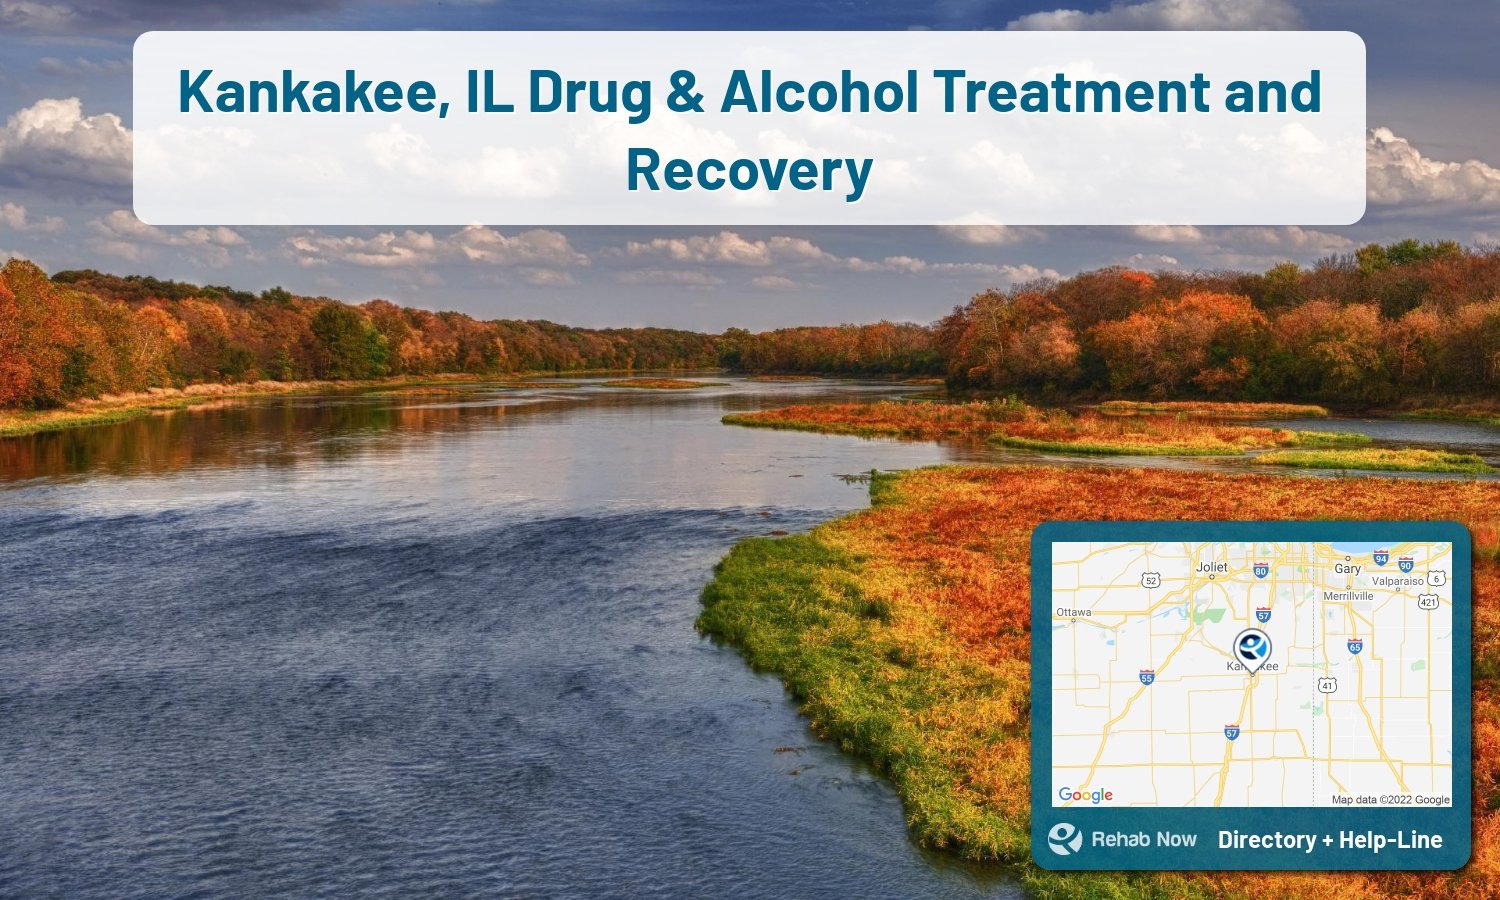 Kankakee, IL Treatment Centers. Find drug rehab in Kankakee, Illinois, or detox and treatment programs. Get the right help now!